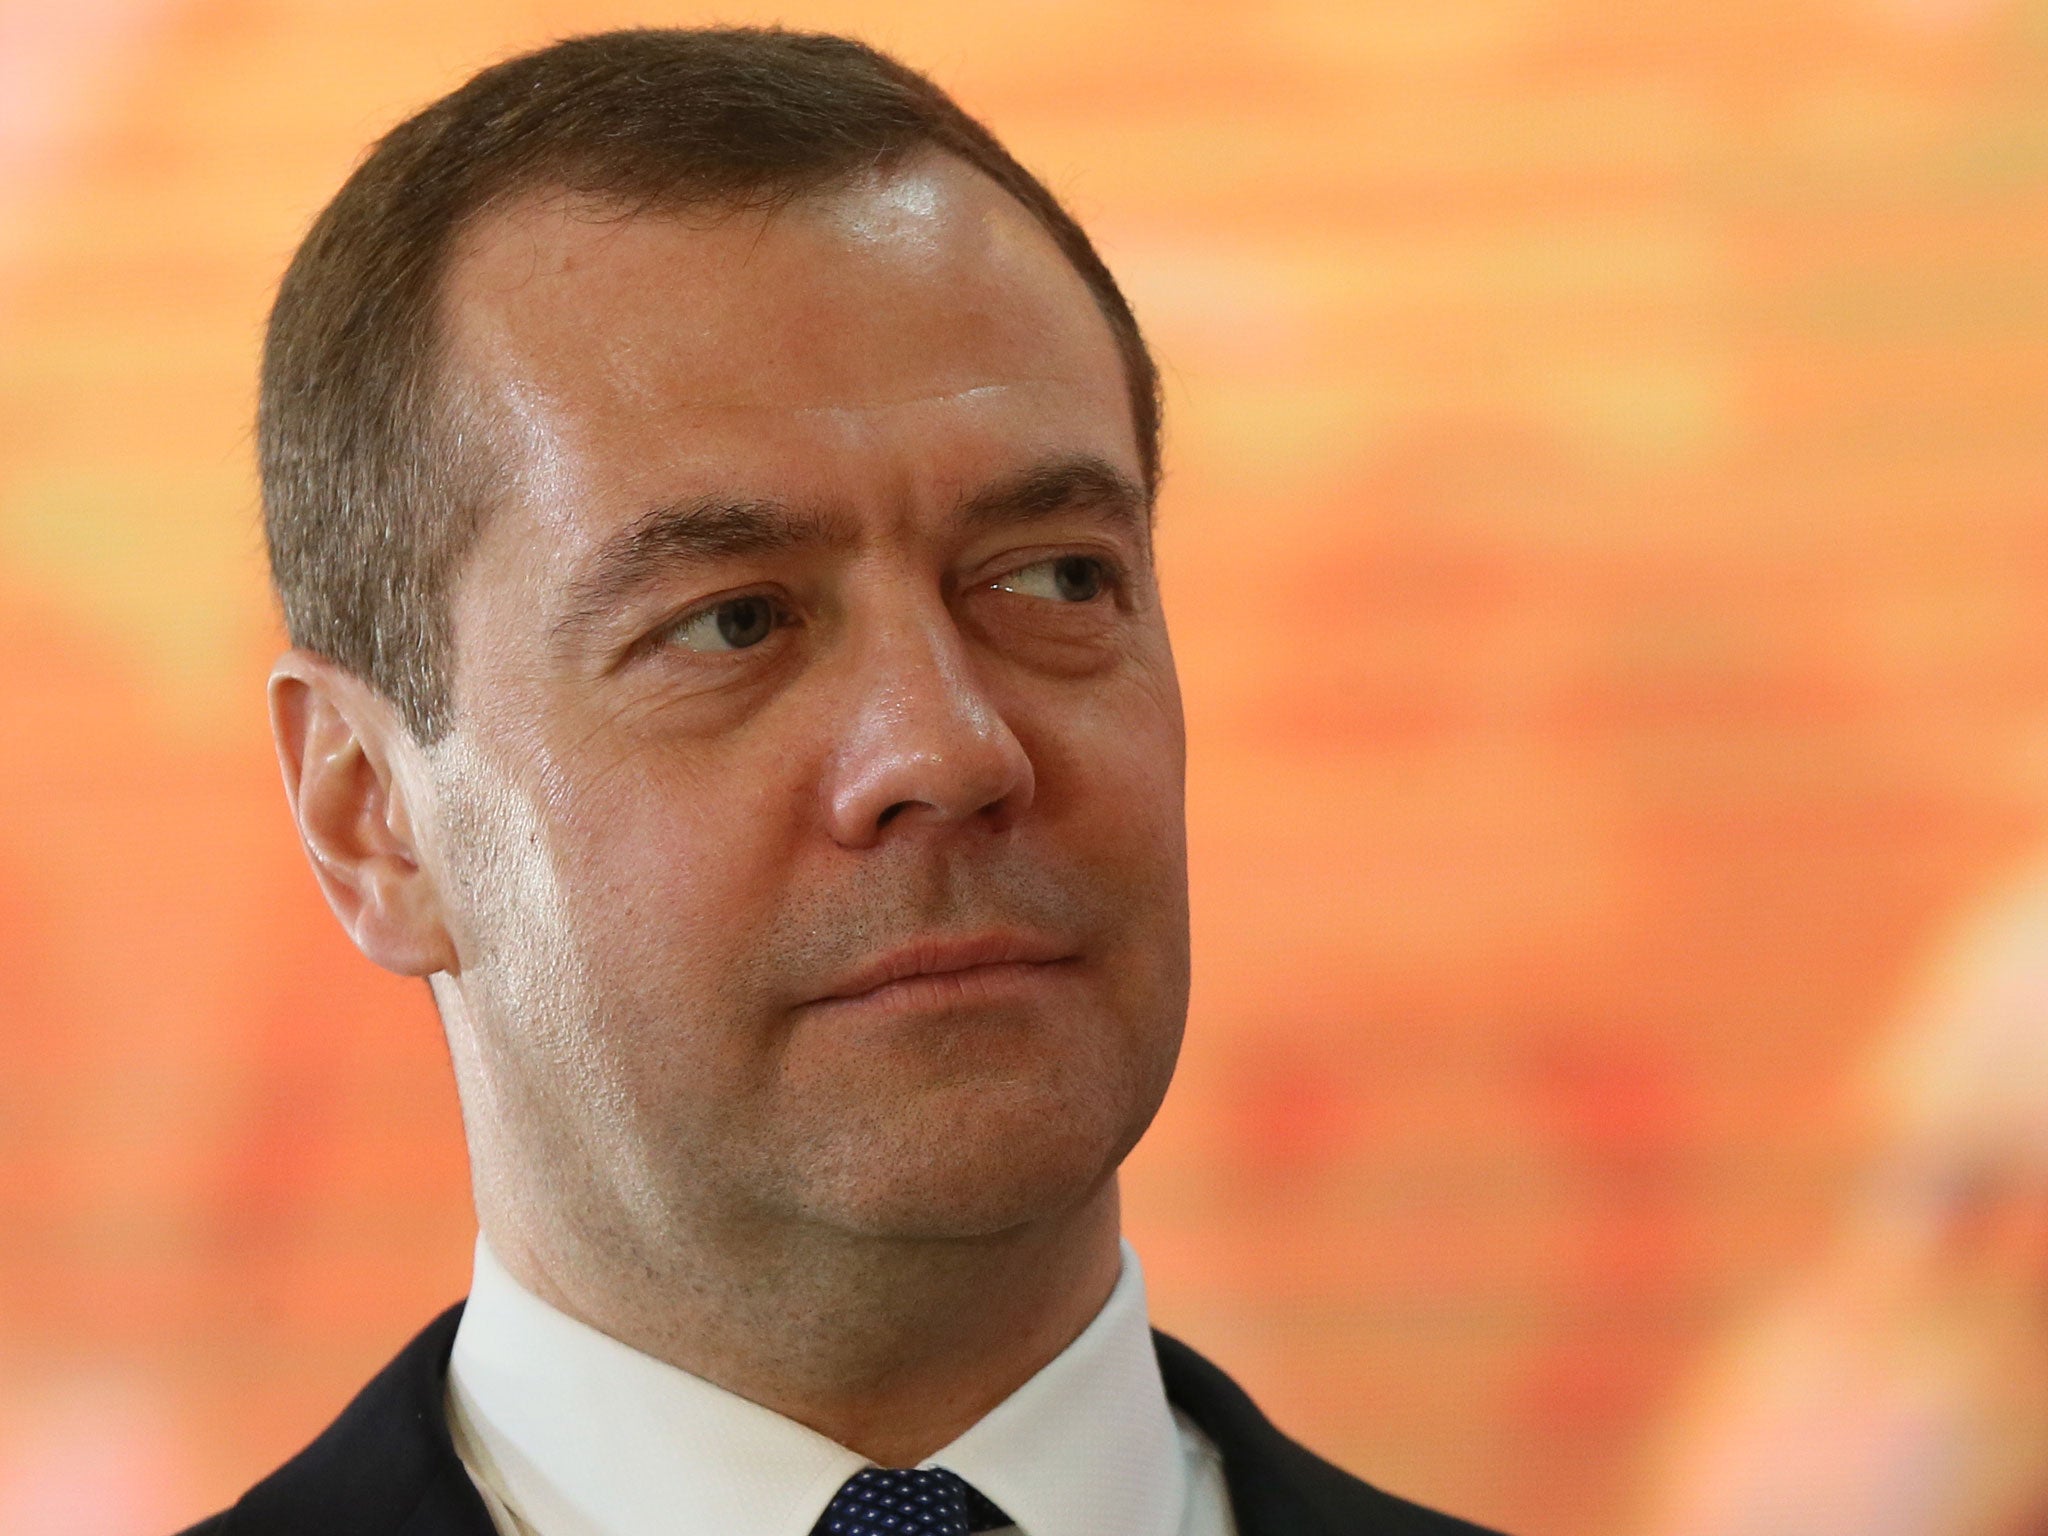 &#13;
Russia's Prime Minister Dmitry Medvedev said the missiles came 'within inches' of his country's forces &#13;